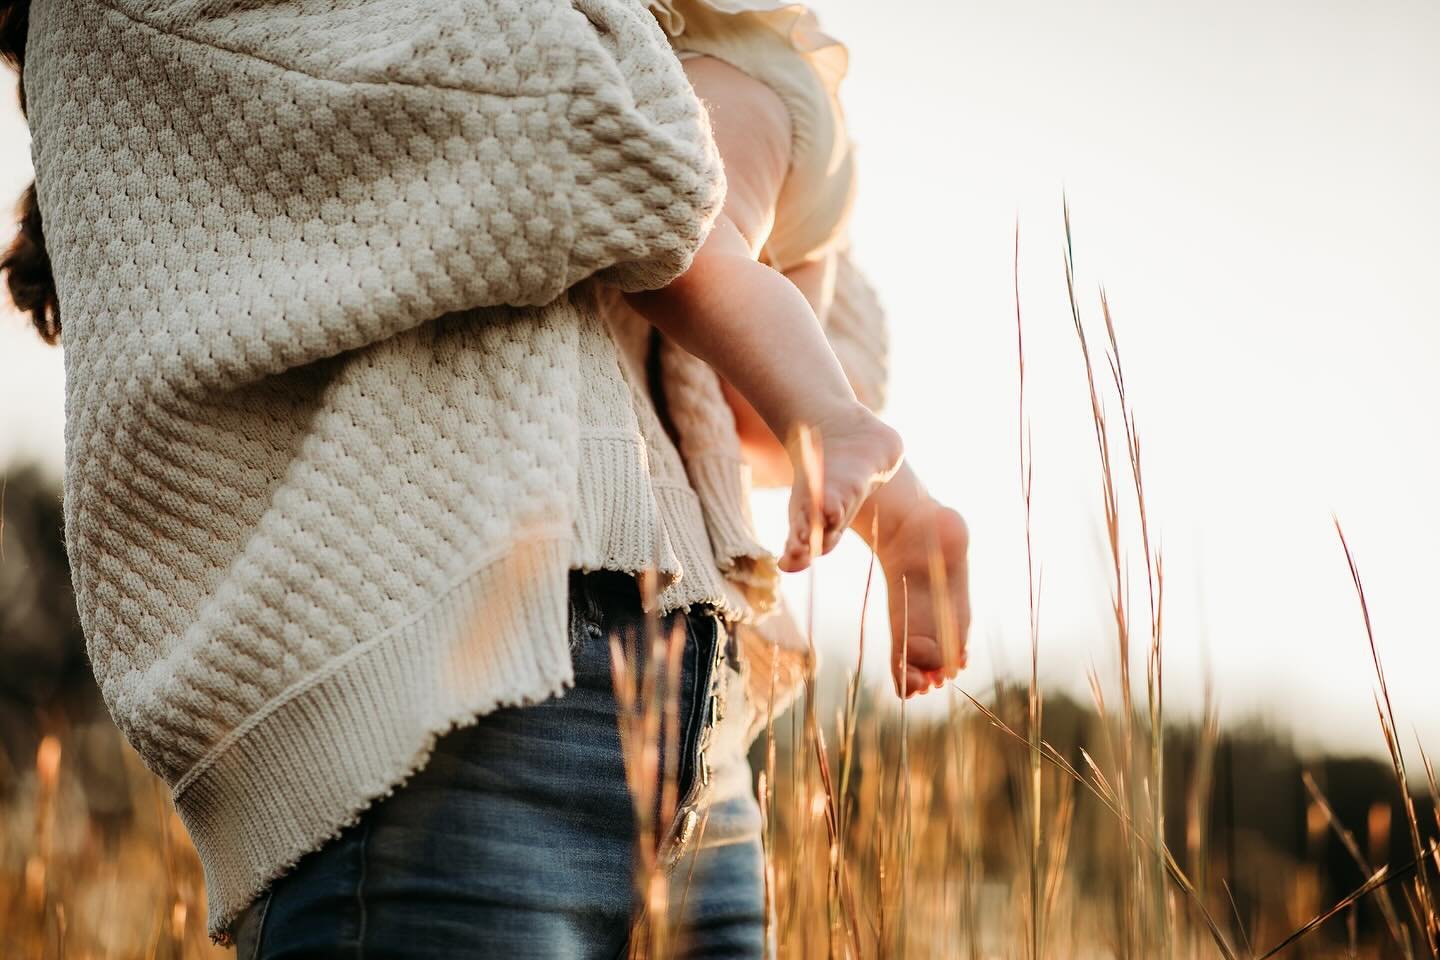 im so ready for golden hour sessions! winter and the first of spring have been so blahhhhh &amp; rainy . whose with me 🙋🏼&zwj;♀️
&mdash;
#chasinglight #goldenhourphotography #miltonphotographer #alpharettaphotographer #cummingphotographer